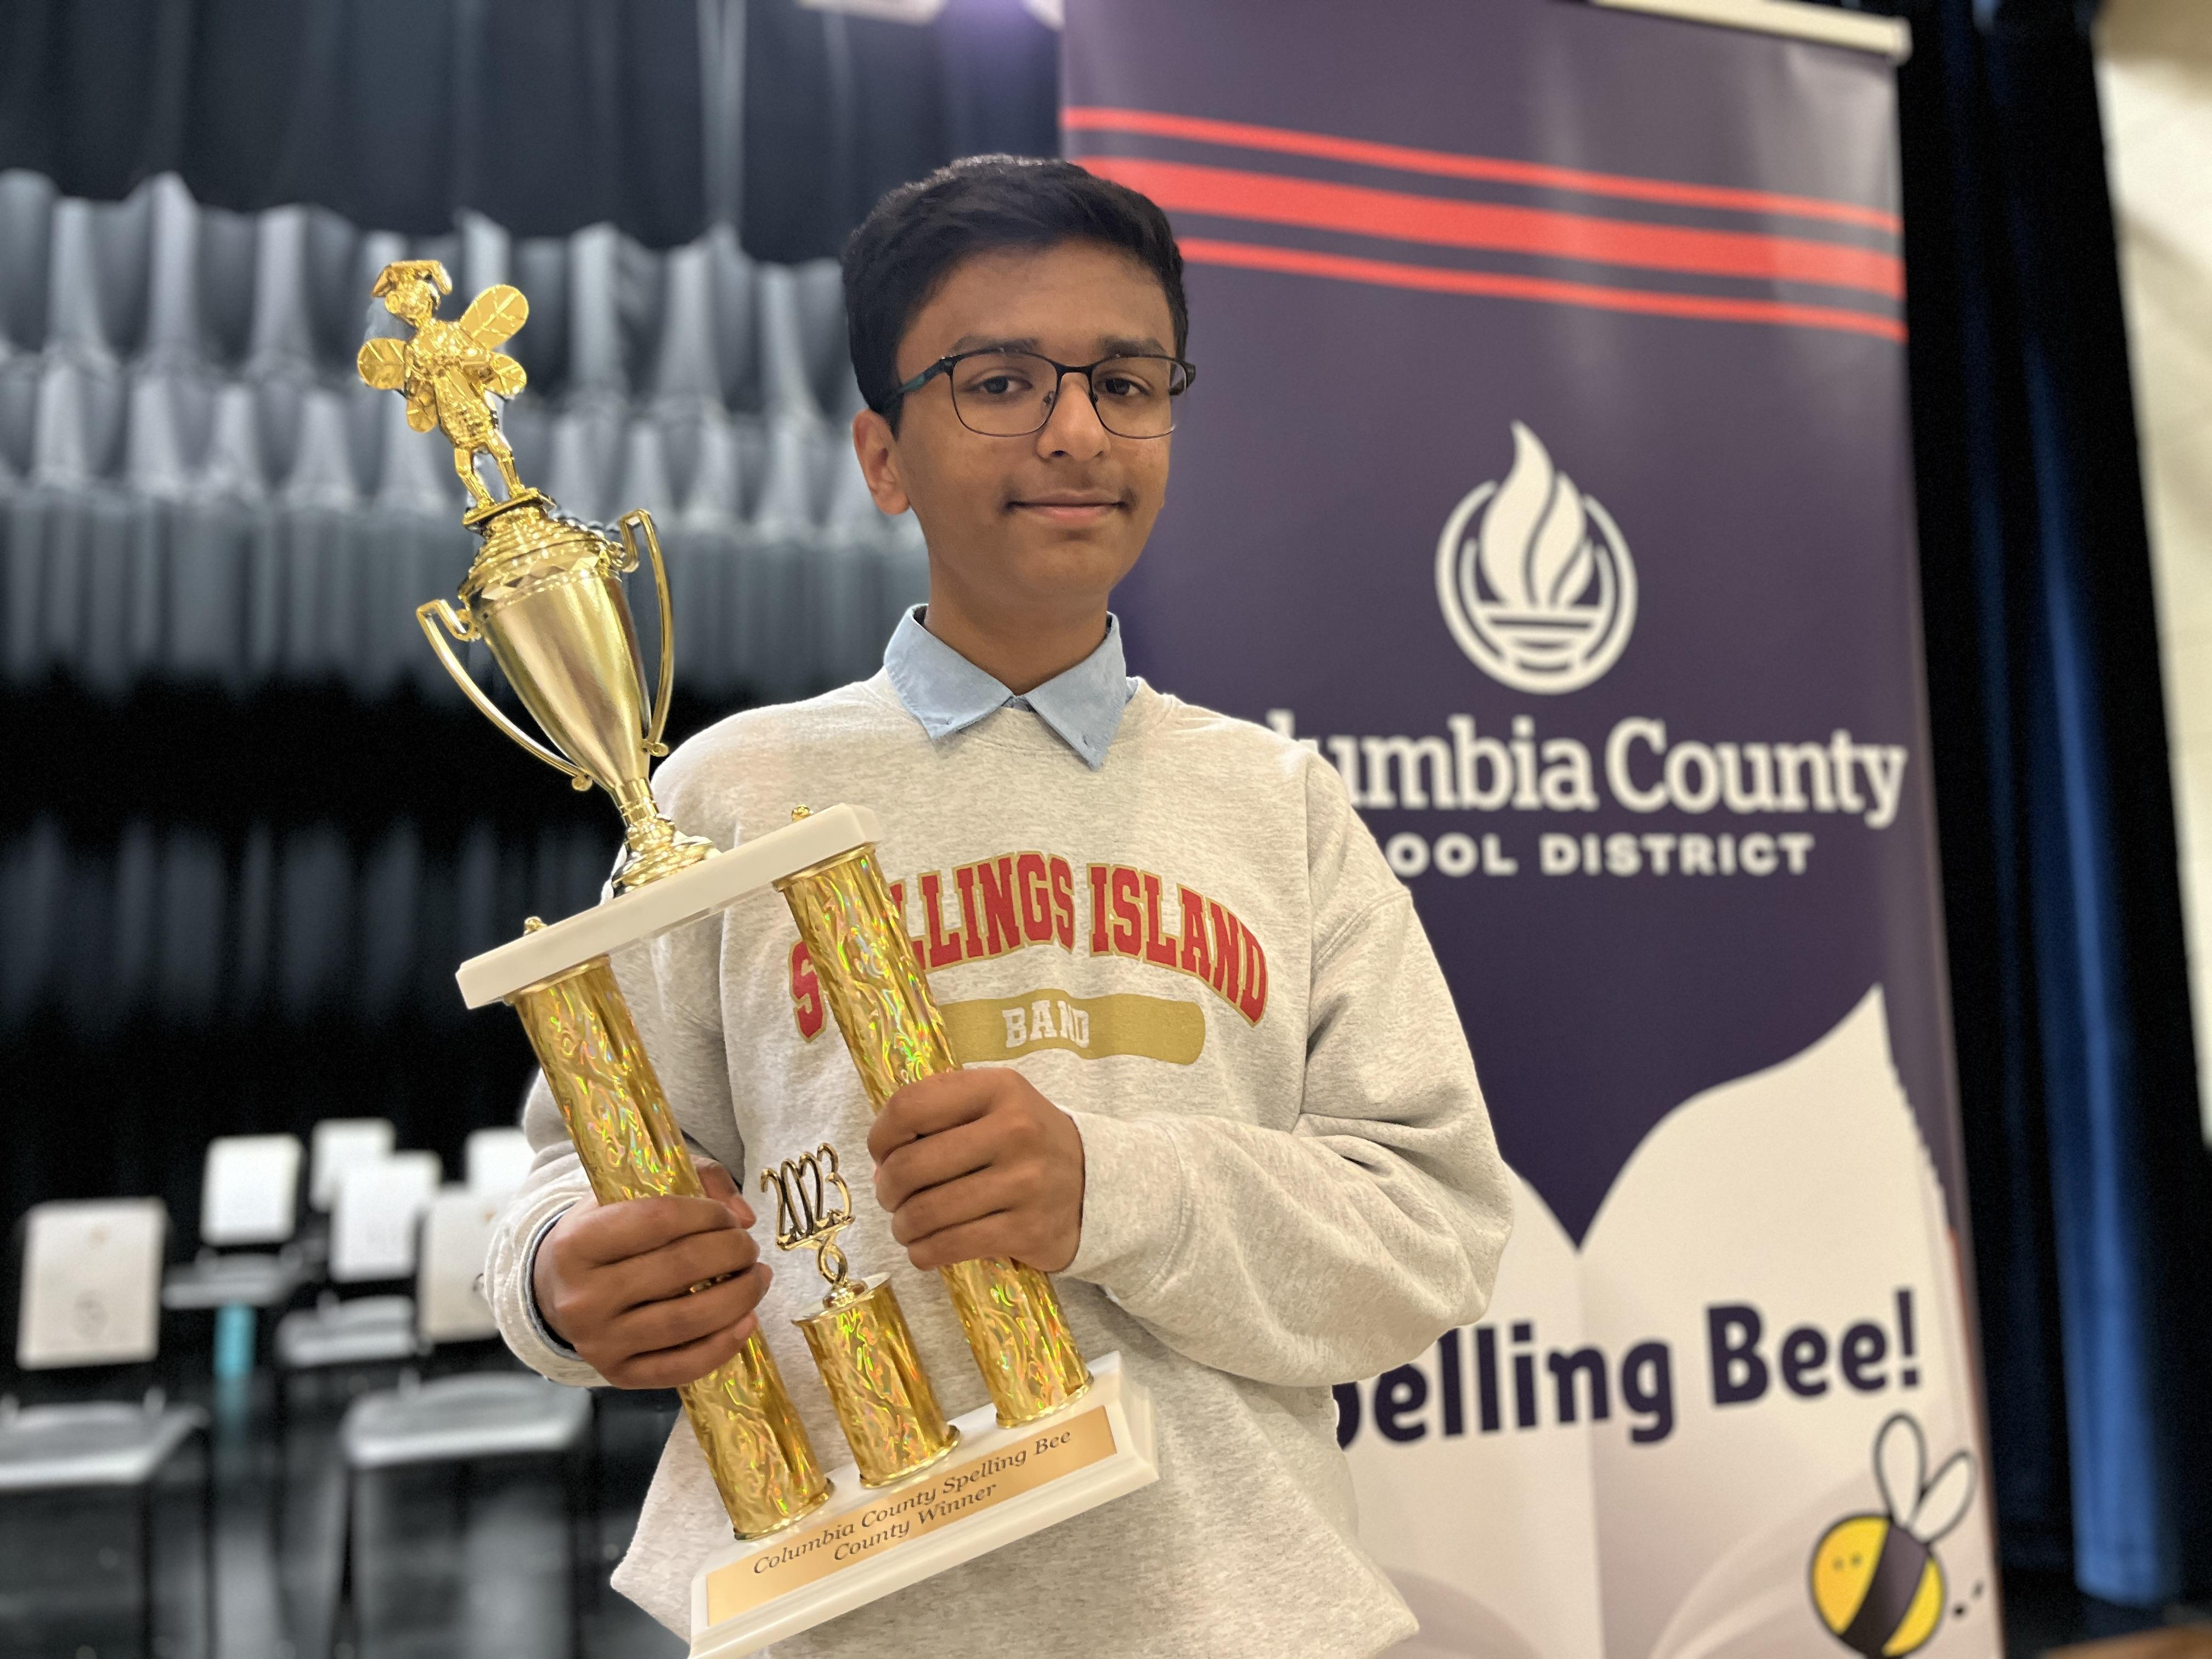 student smiling with trophy